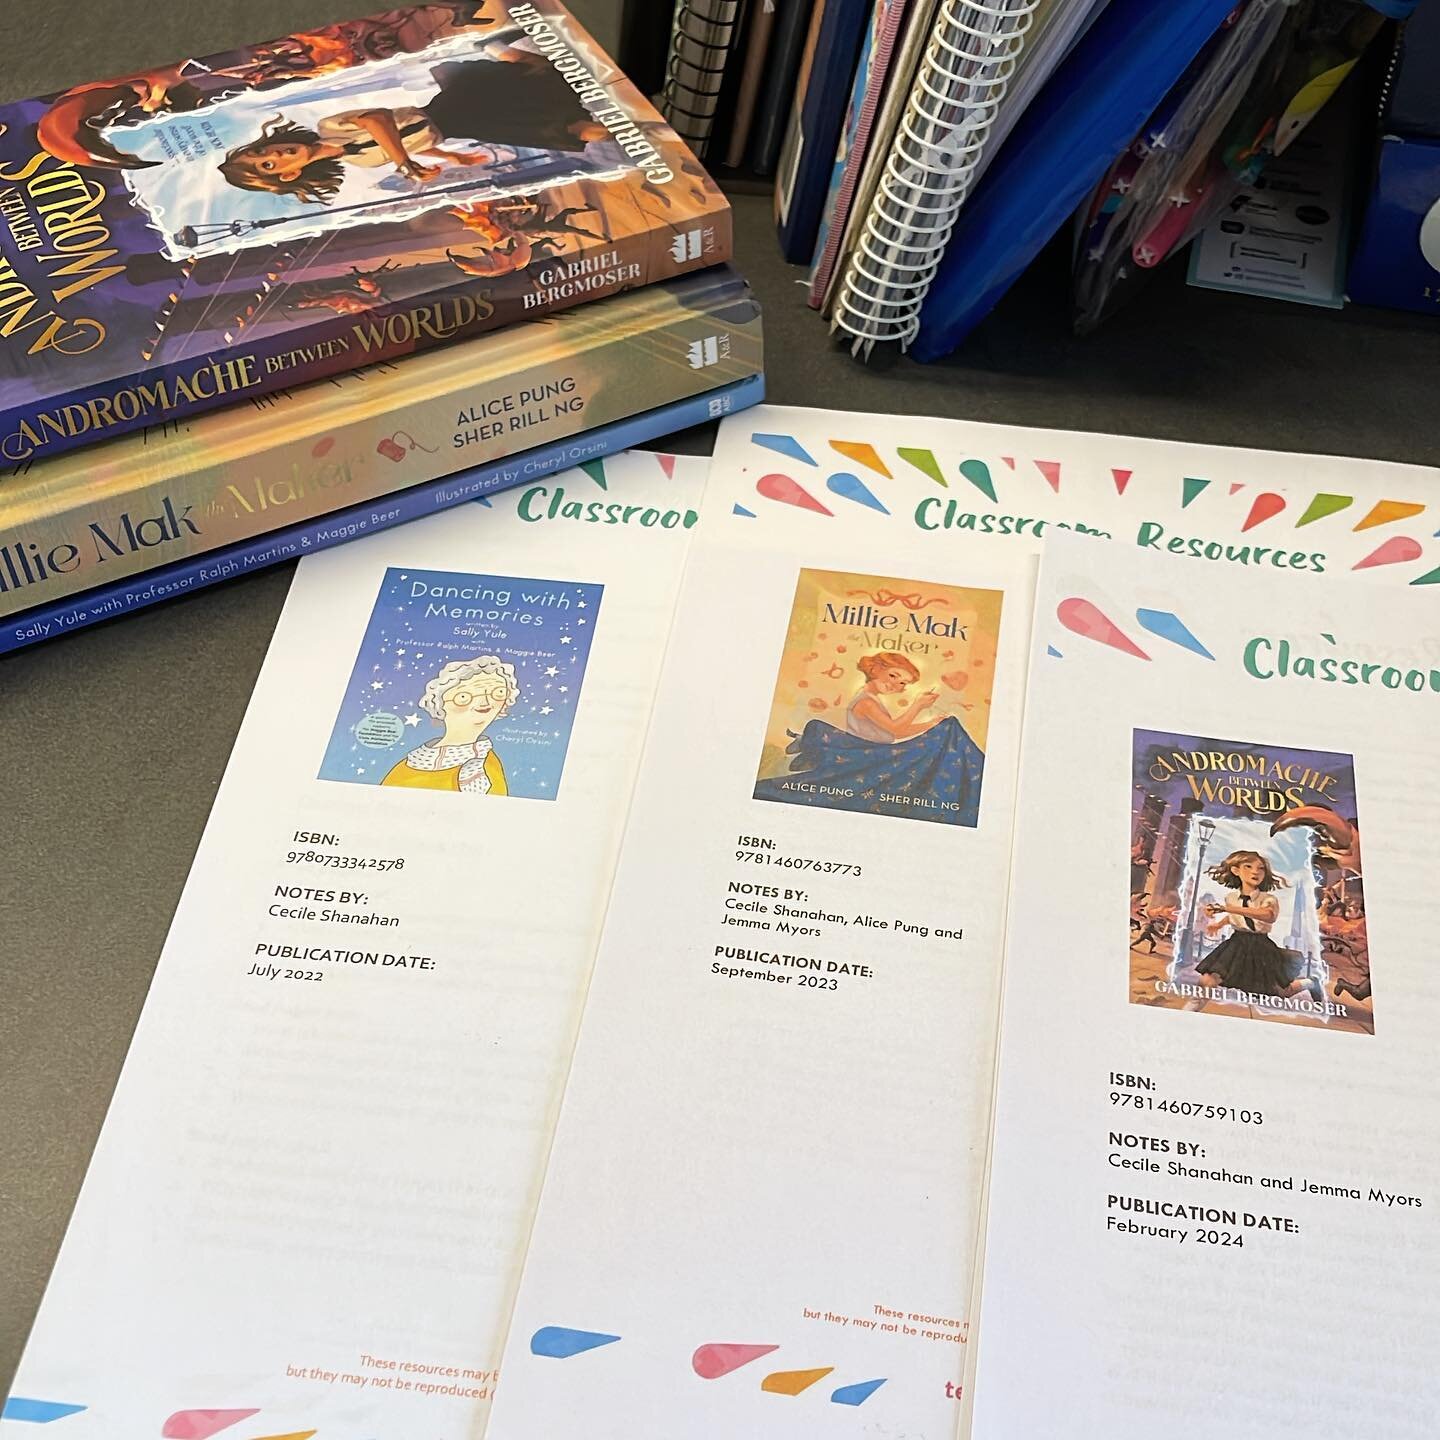 Before I turned to freelance editing I was a secondary school English, Media and Humanities teacher. Working with @harperkidsau to create classroom resources for their children&rsquo;s books is the perfect merging of my two careers and passions. If y